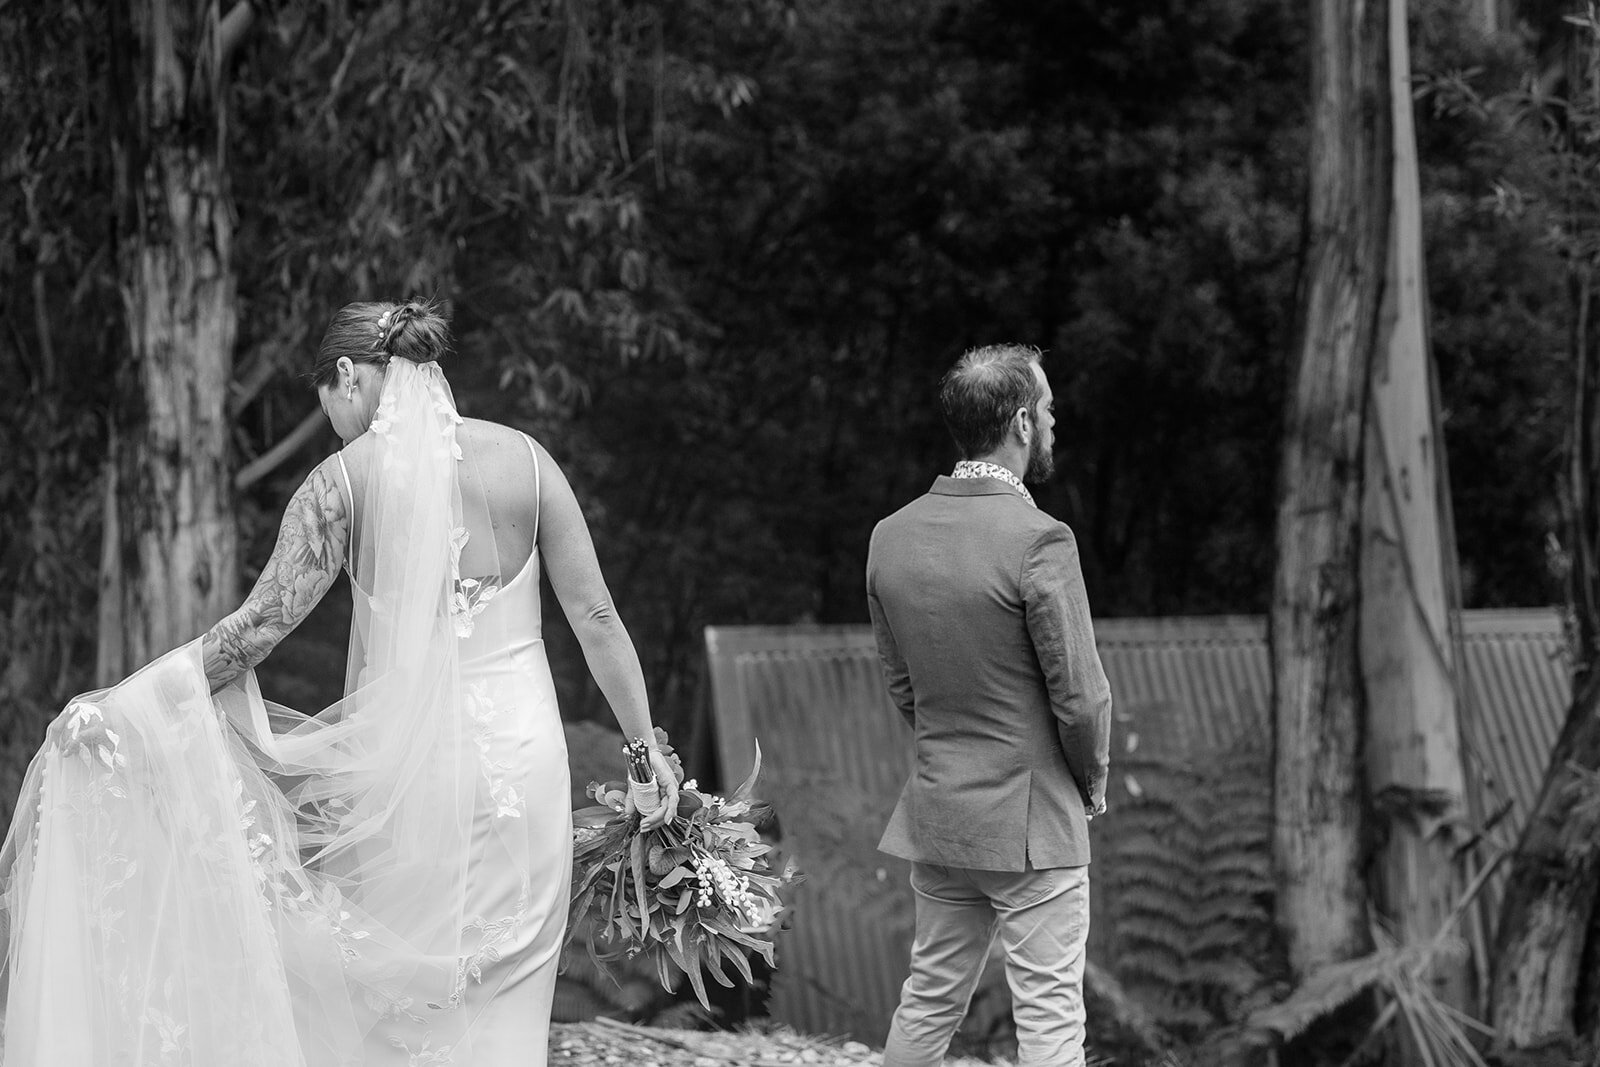 Stacey&Cory-Coast&Pines-52